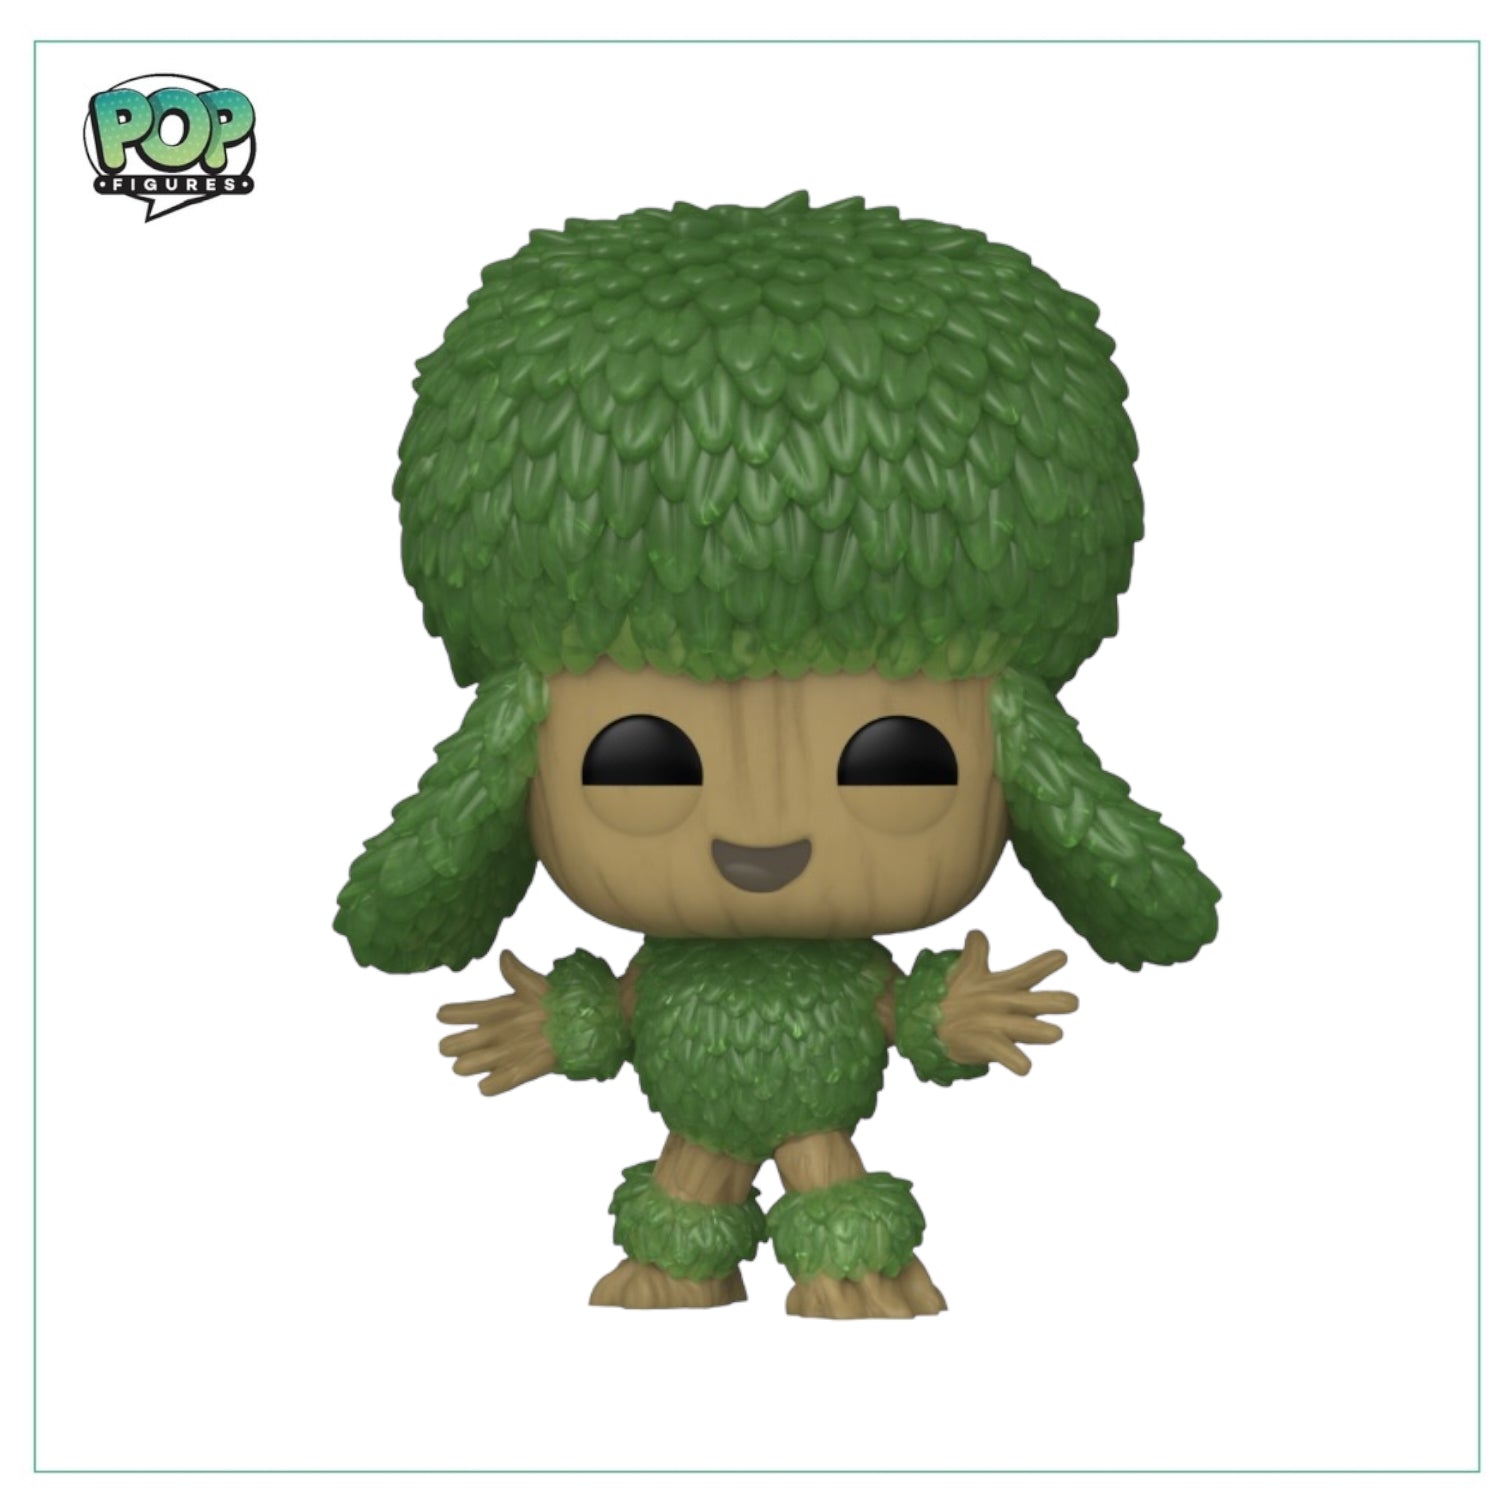 Poodle Groot #1219 Funko Pop! - I Am Groot - Boxlunch Earth Day Exclusive